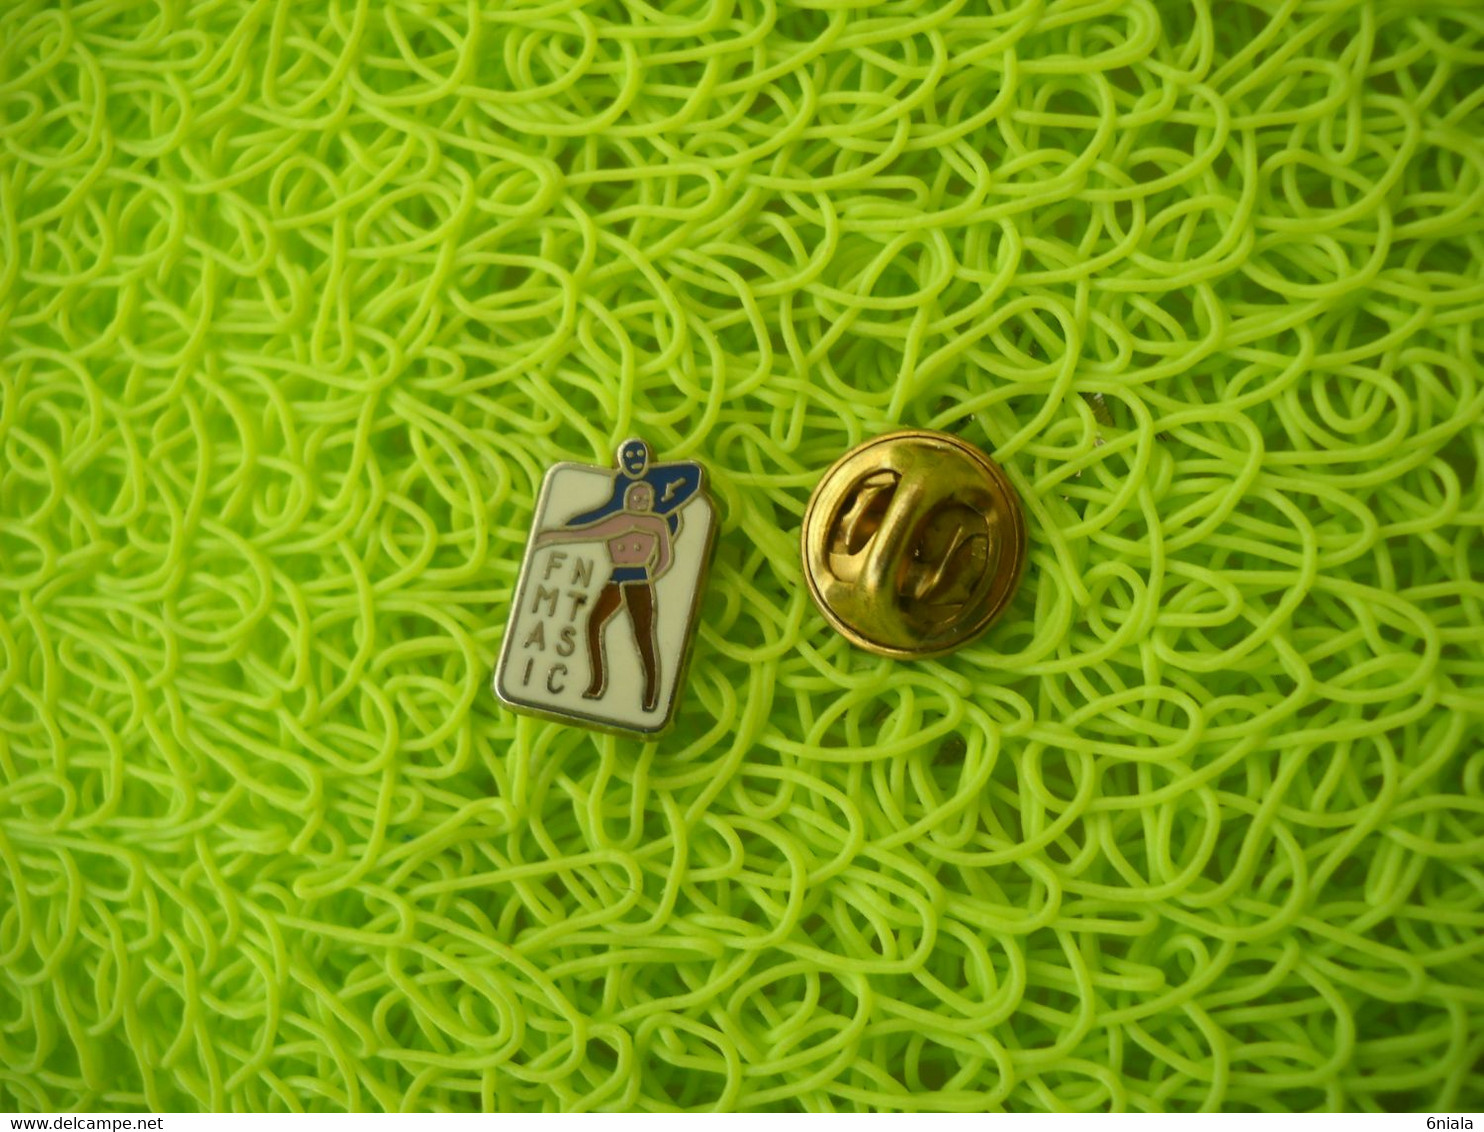 2052  PINS  Pin's     FNMTASIC  FN MT ASIC  Patinage Artistique  Couple - Patinage Artistique